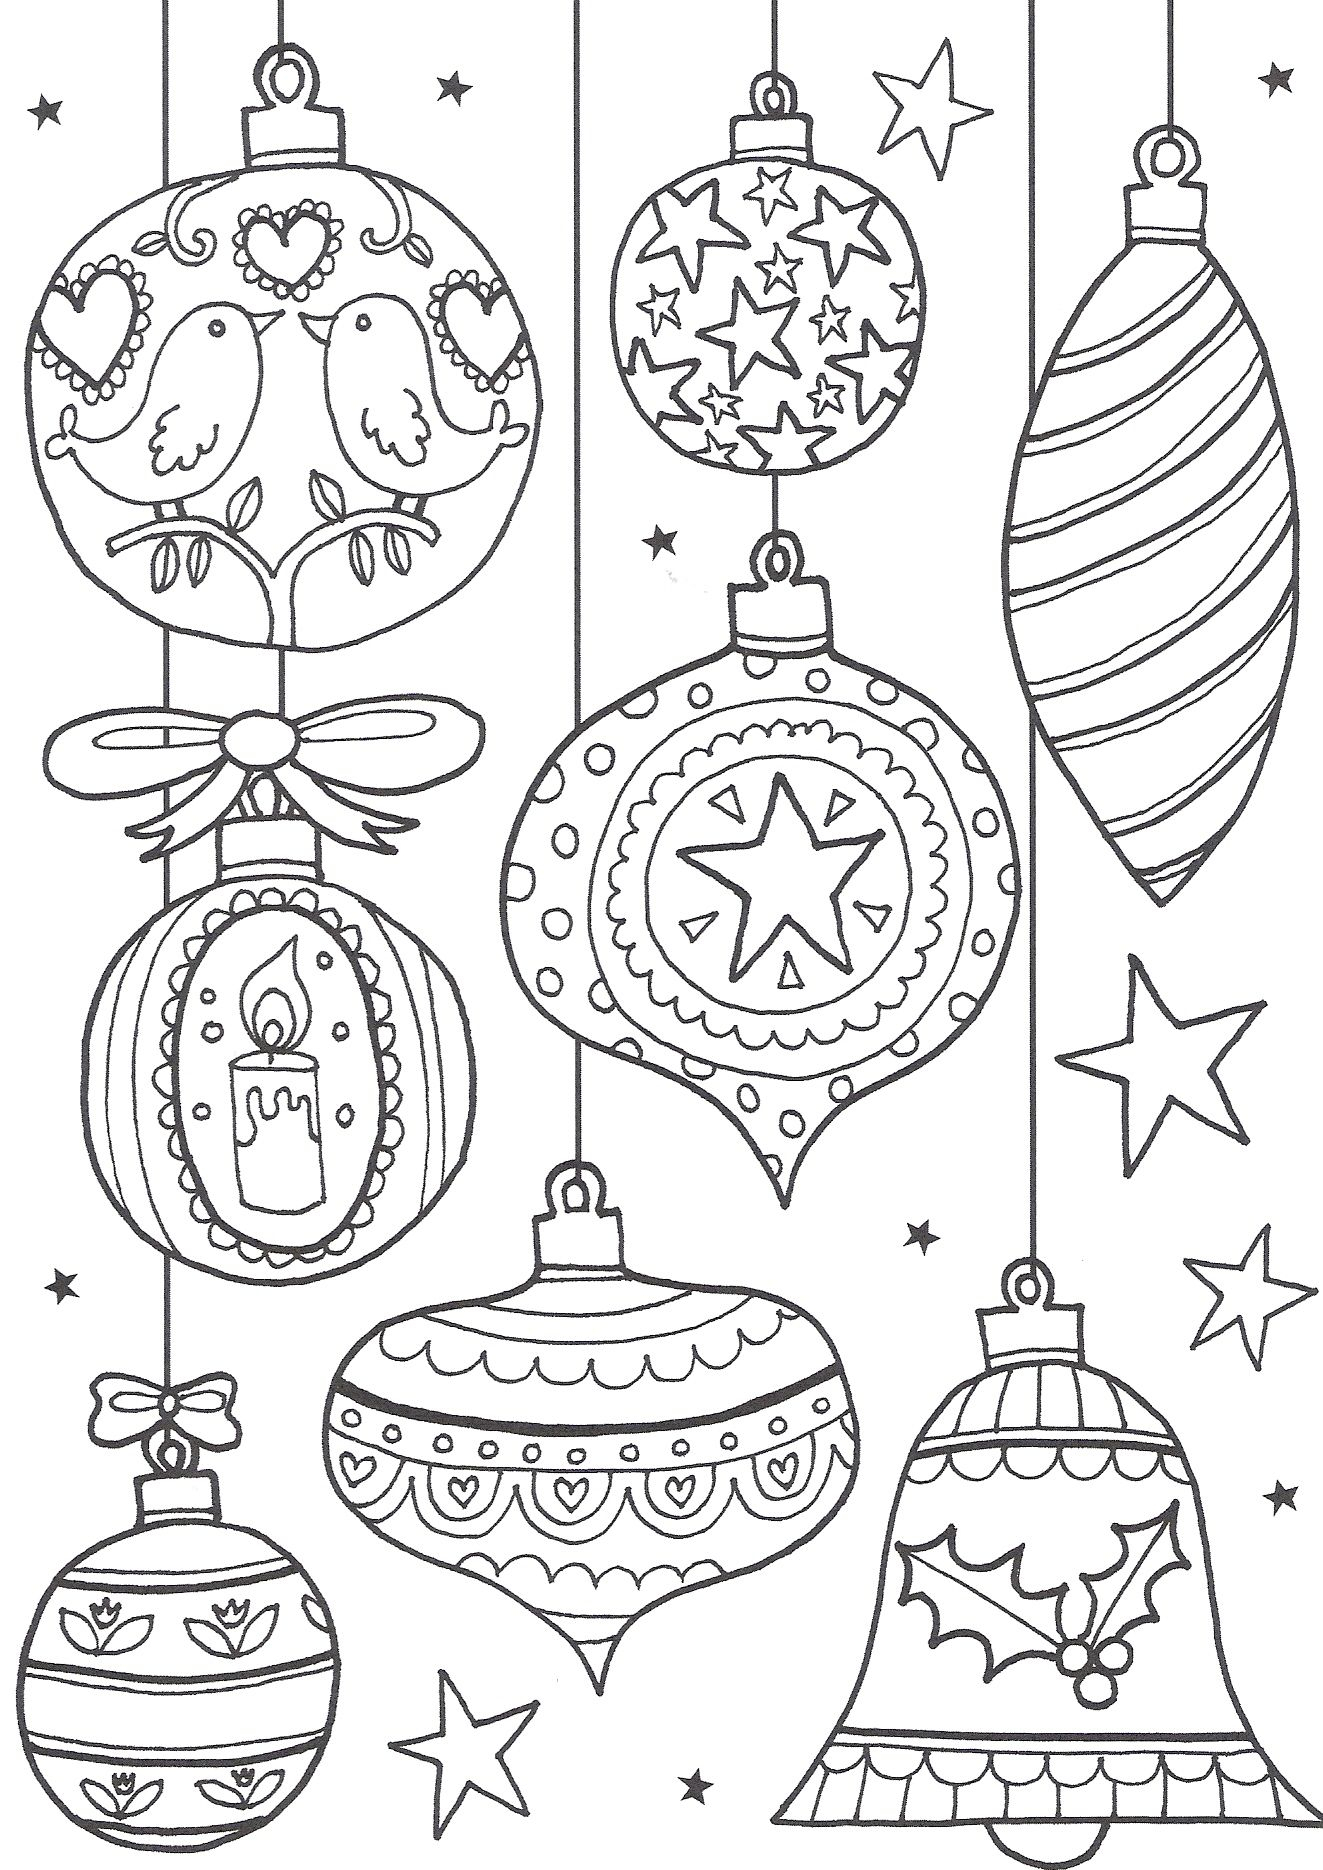 Free Christmas Colouring Pages For Adults – The Ultimate Roundup - Free Printable Holiday Coloring Pages